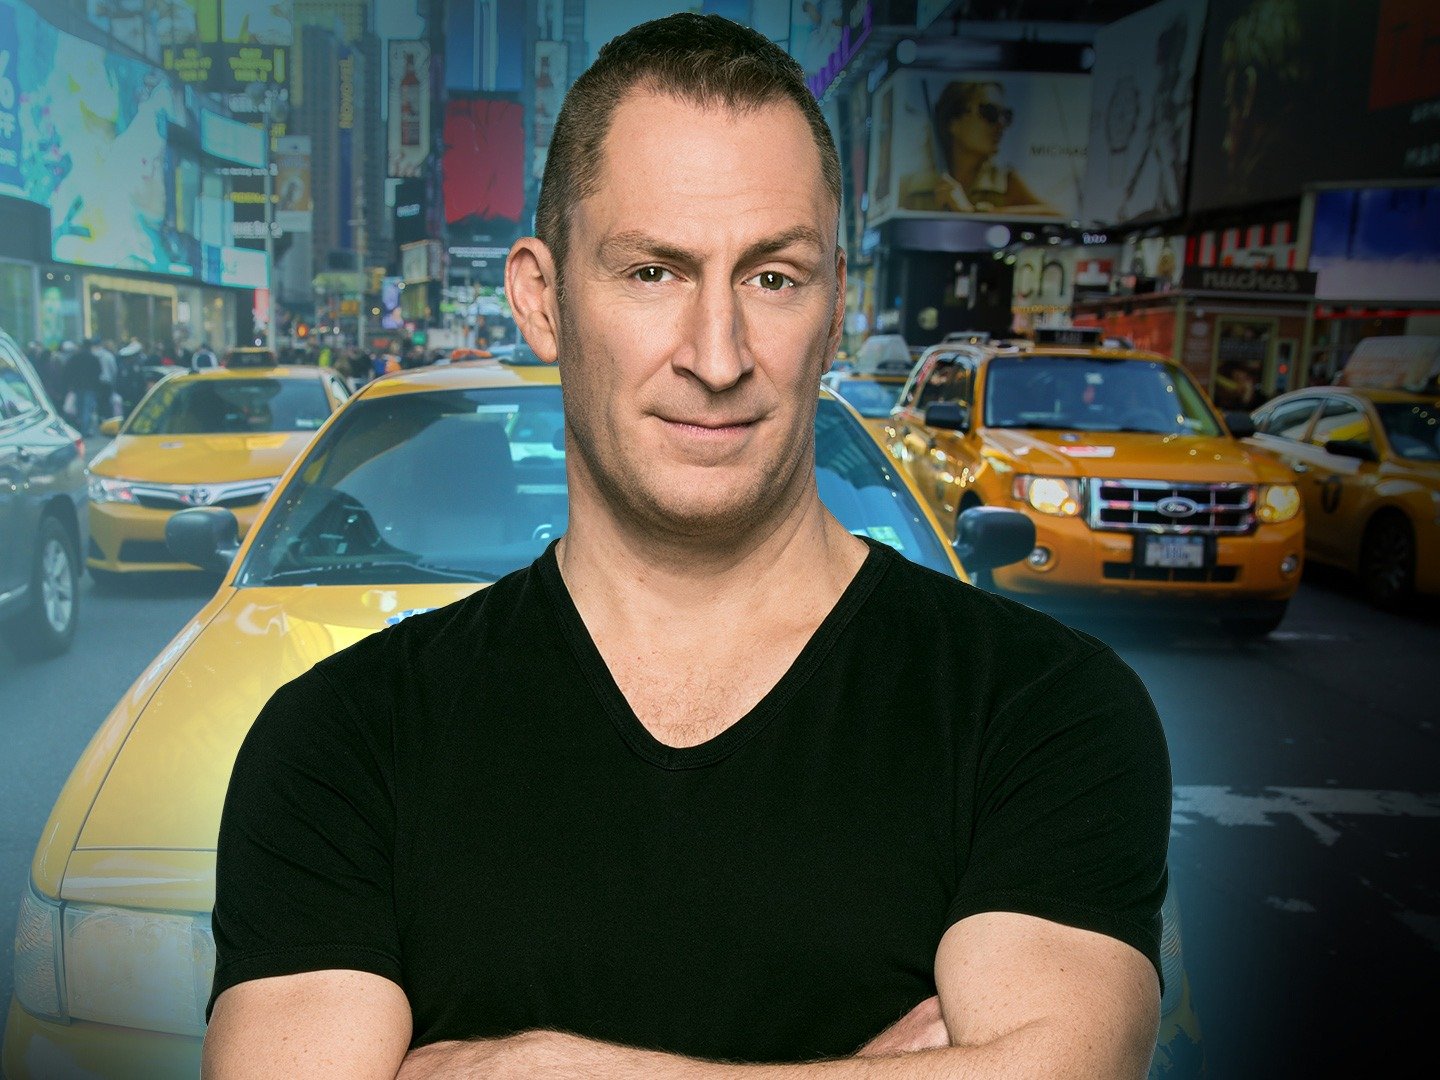 Cash Cab on TV Season 3 Episode 48 Channels and schedules